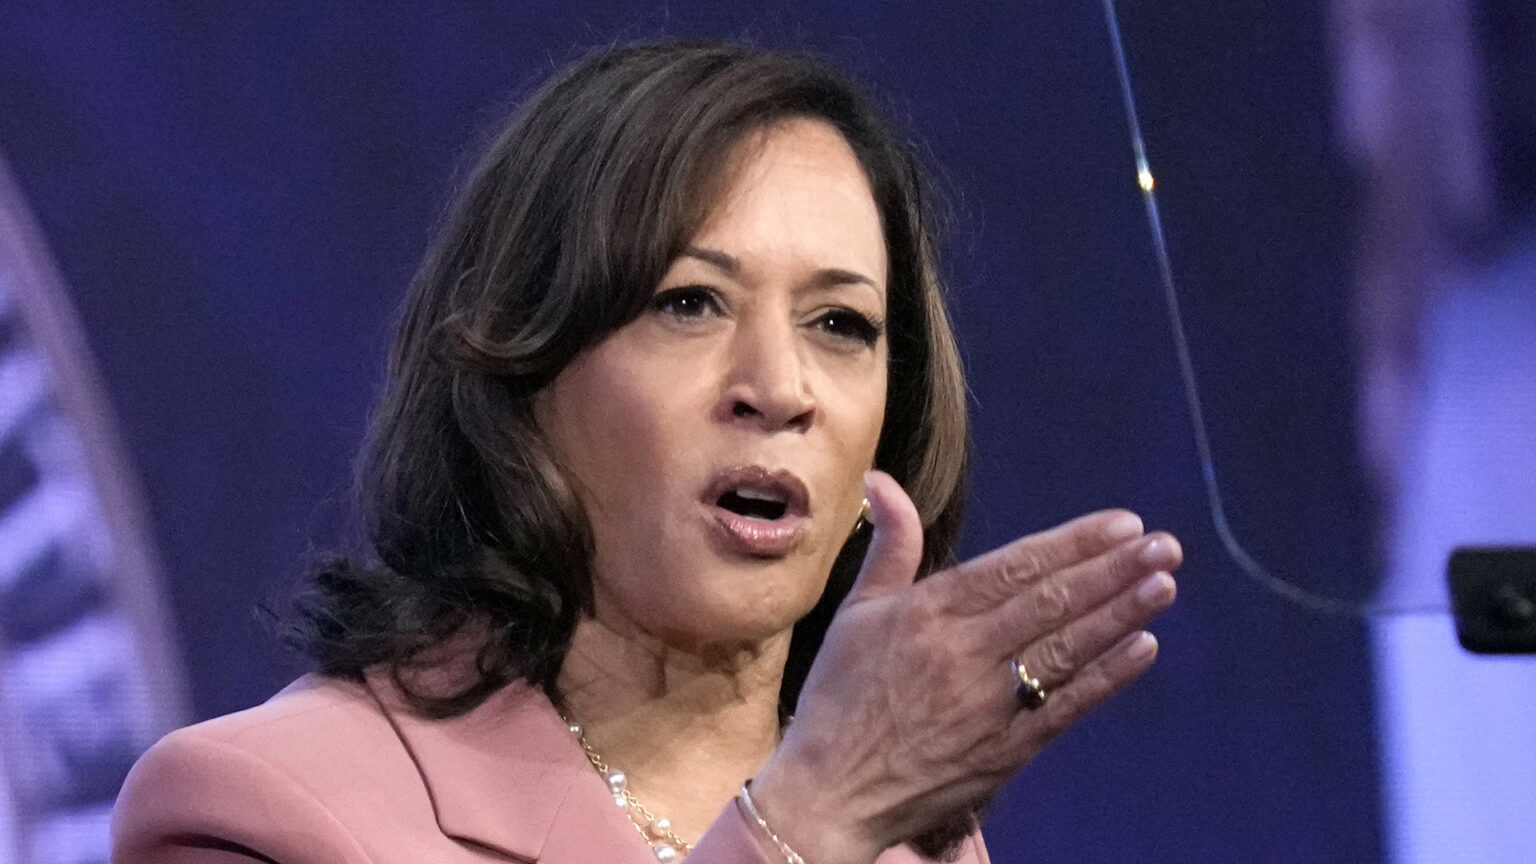 Kamala Harris gestures with her right hand while speaking.